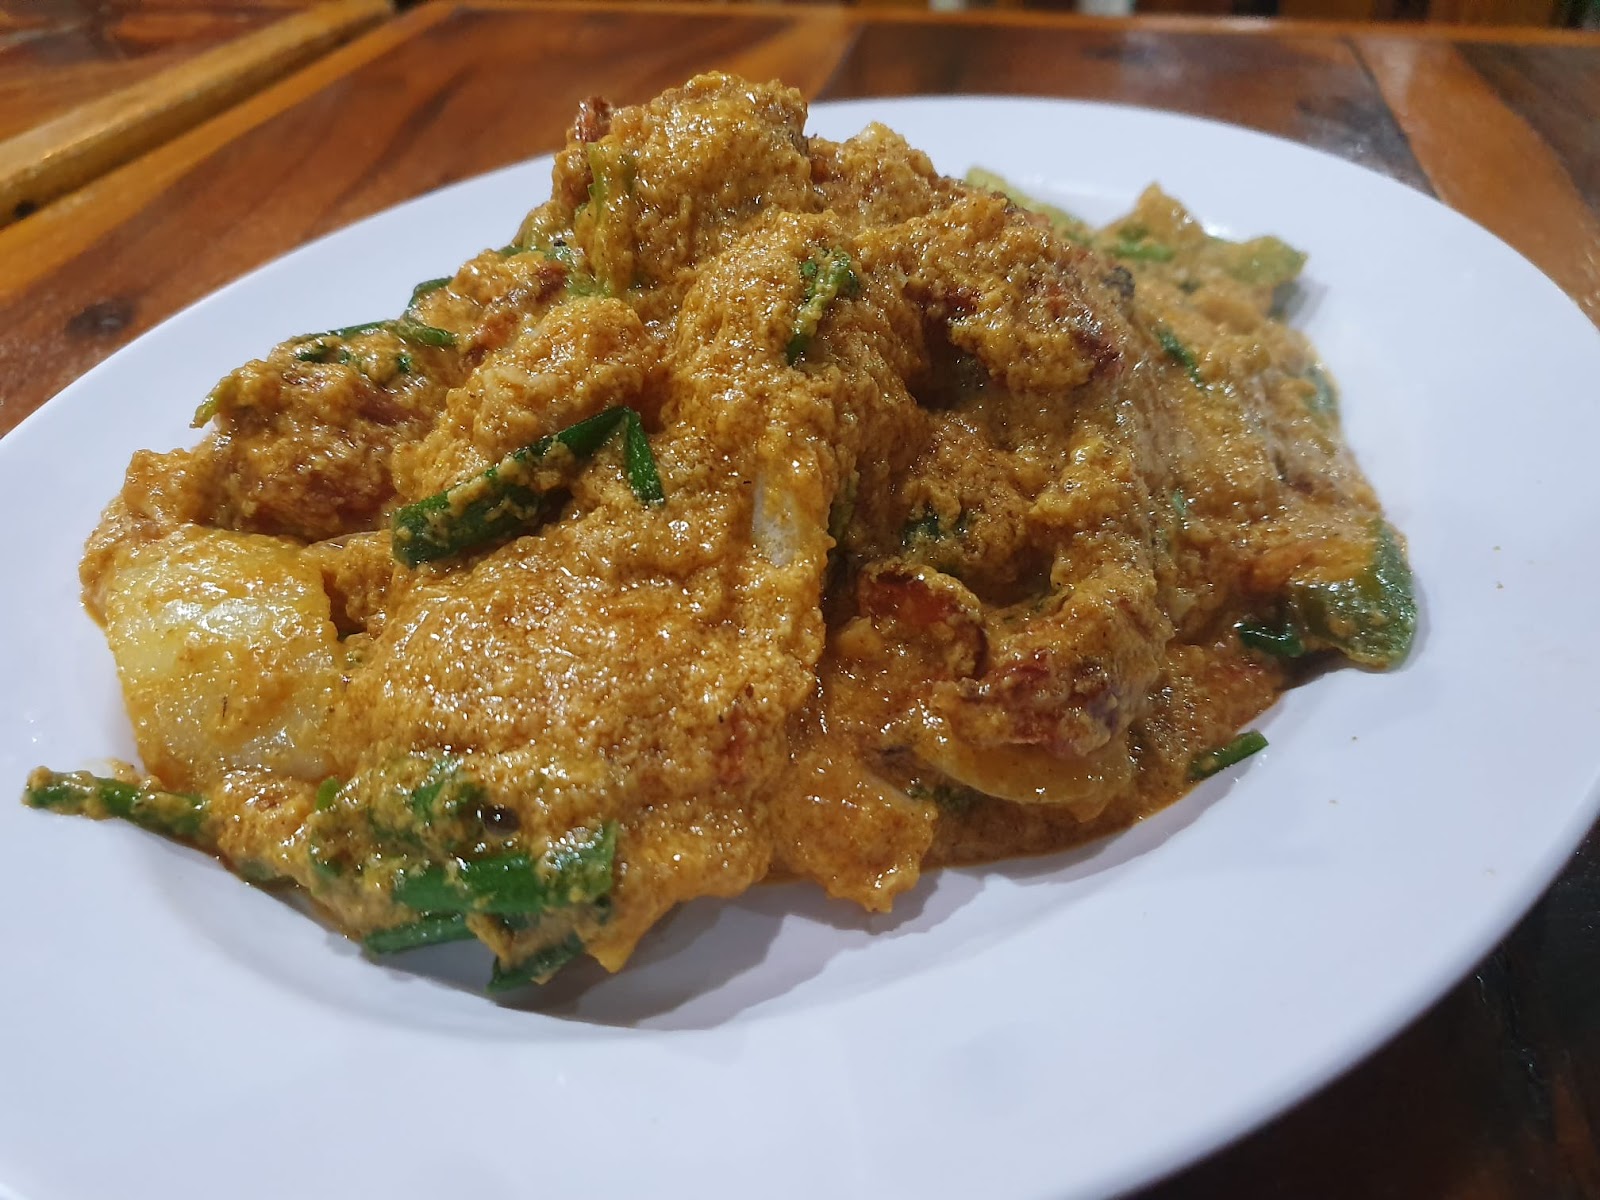 soft shell crab yellow curry from Northeast restaurant in Bangkok